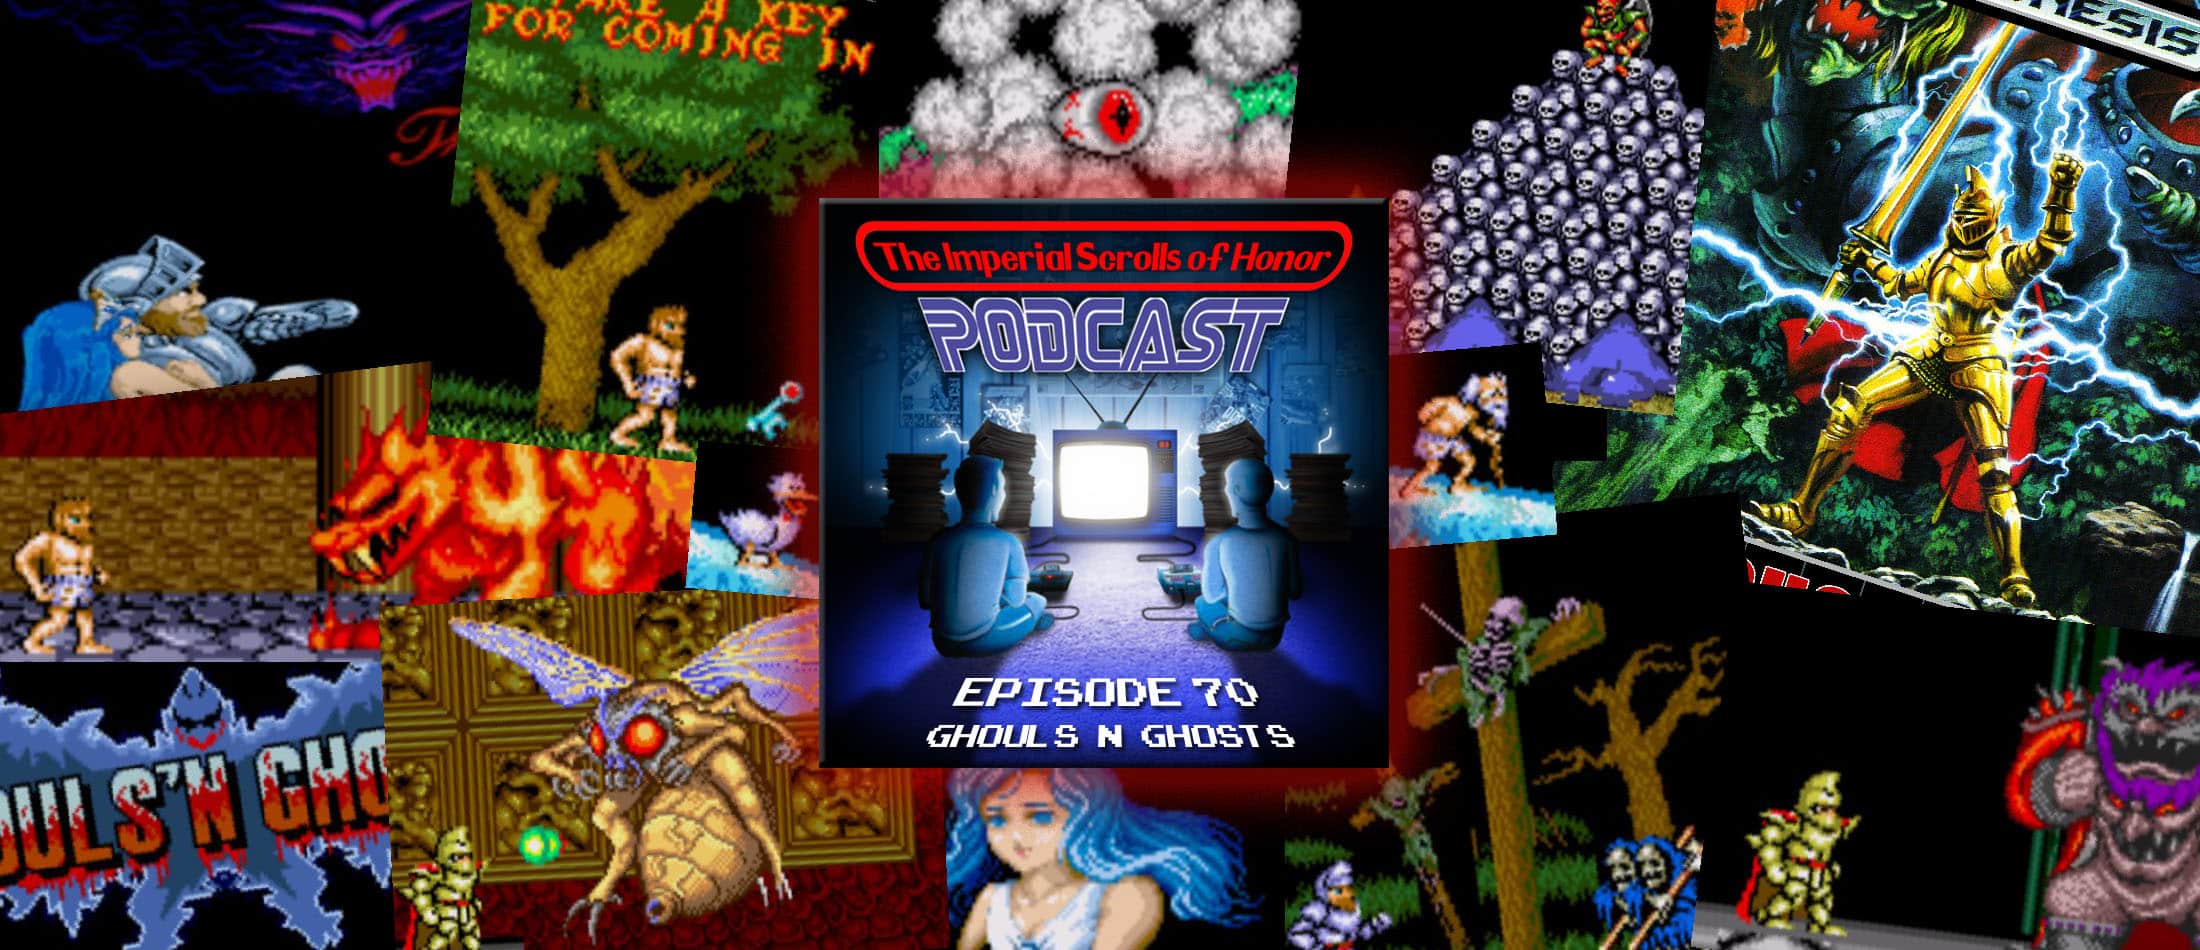 The Imperial Scrolls of Honor Podcast - Ep 70 - Ghouls 'N Ghosts (GEN)